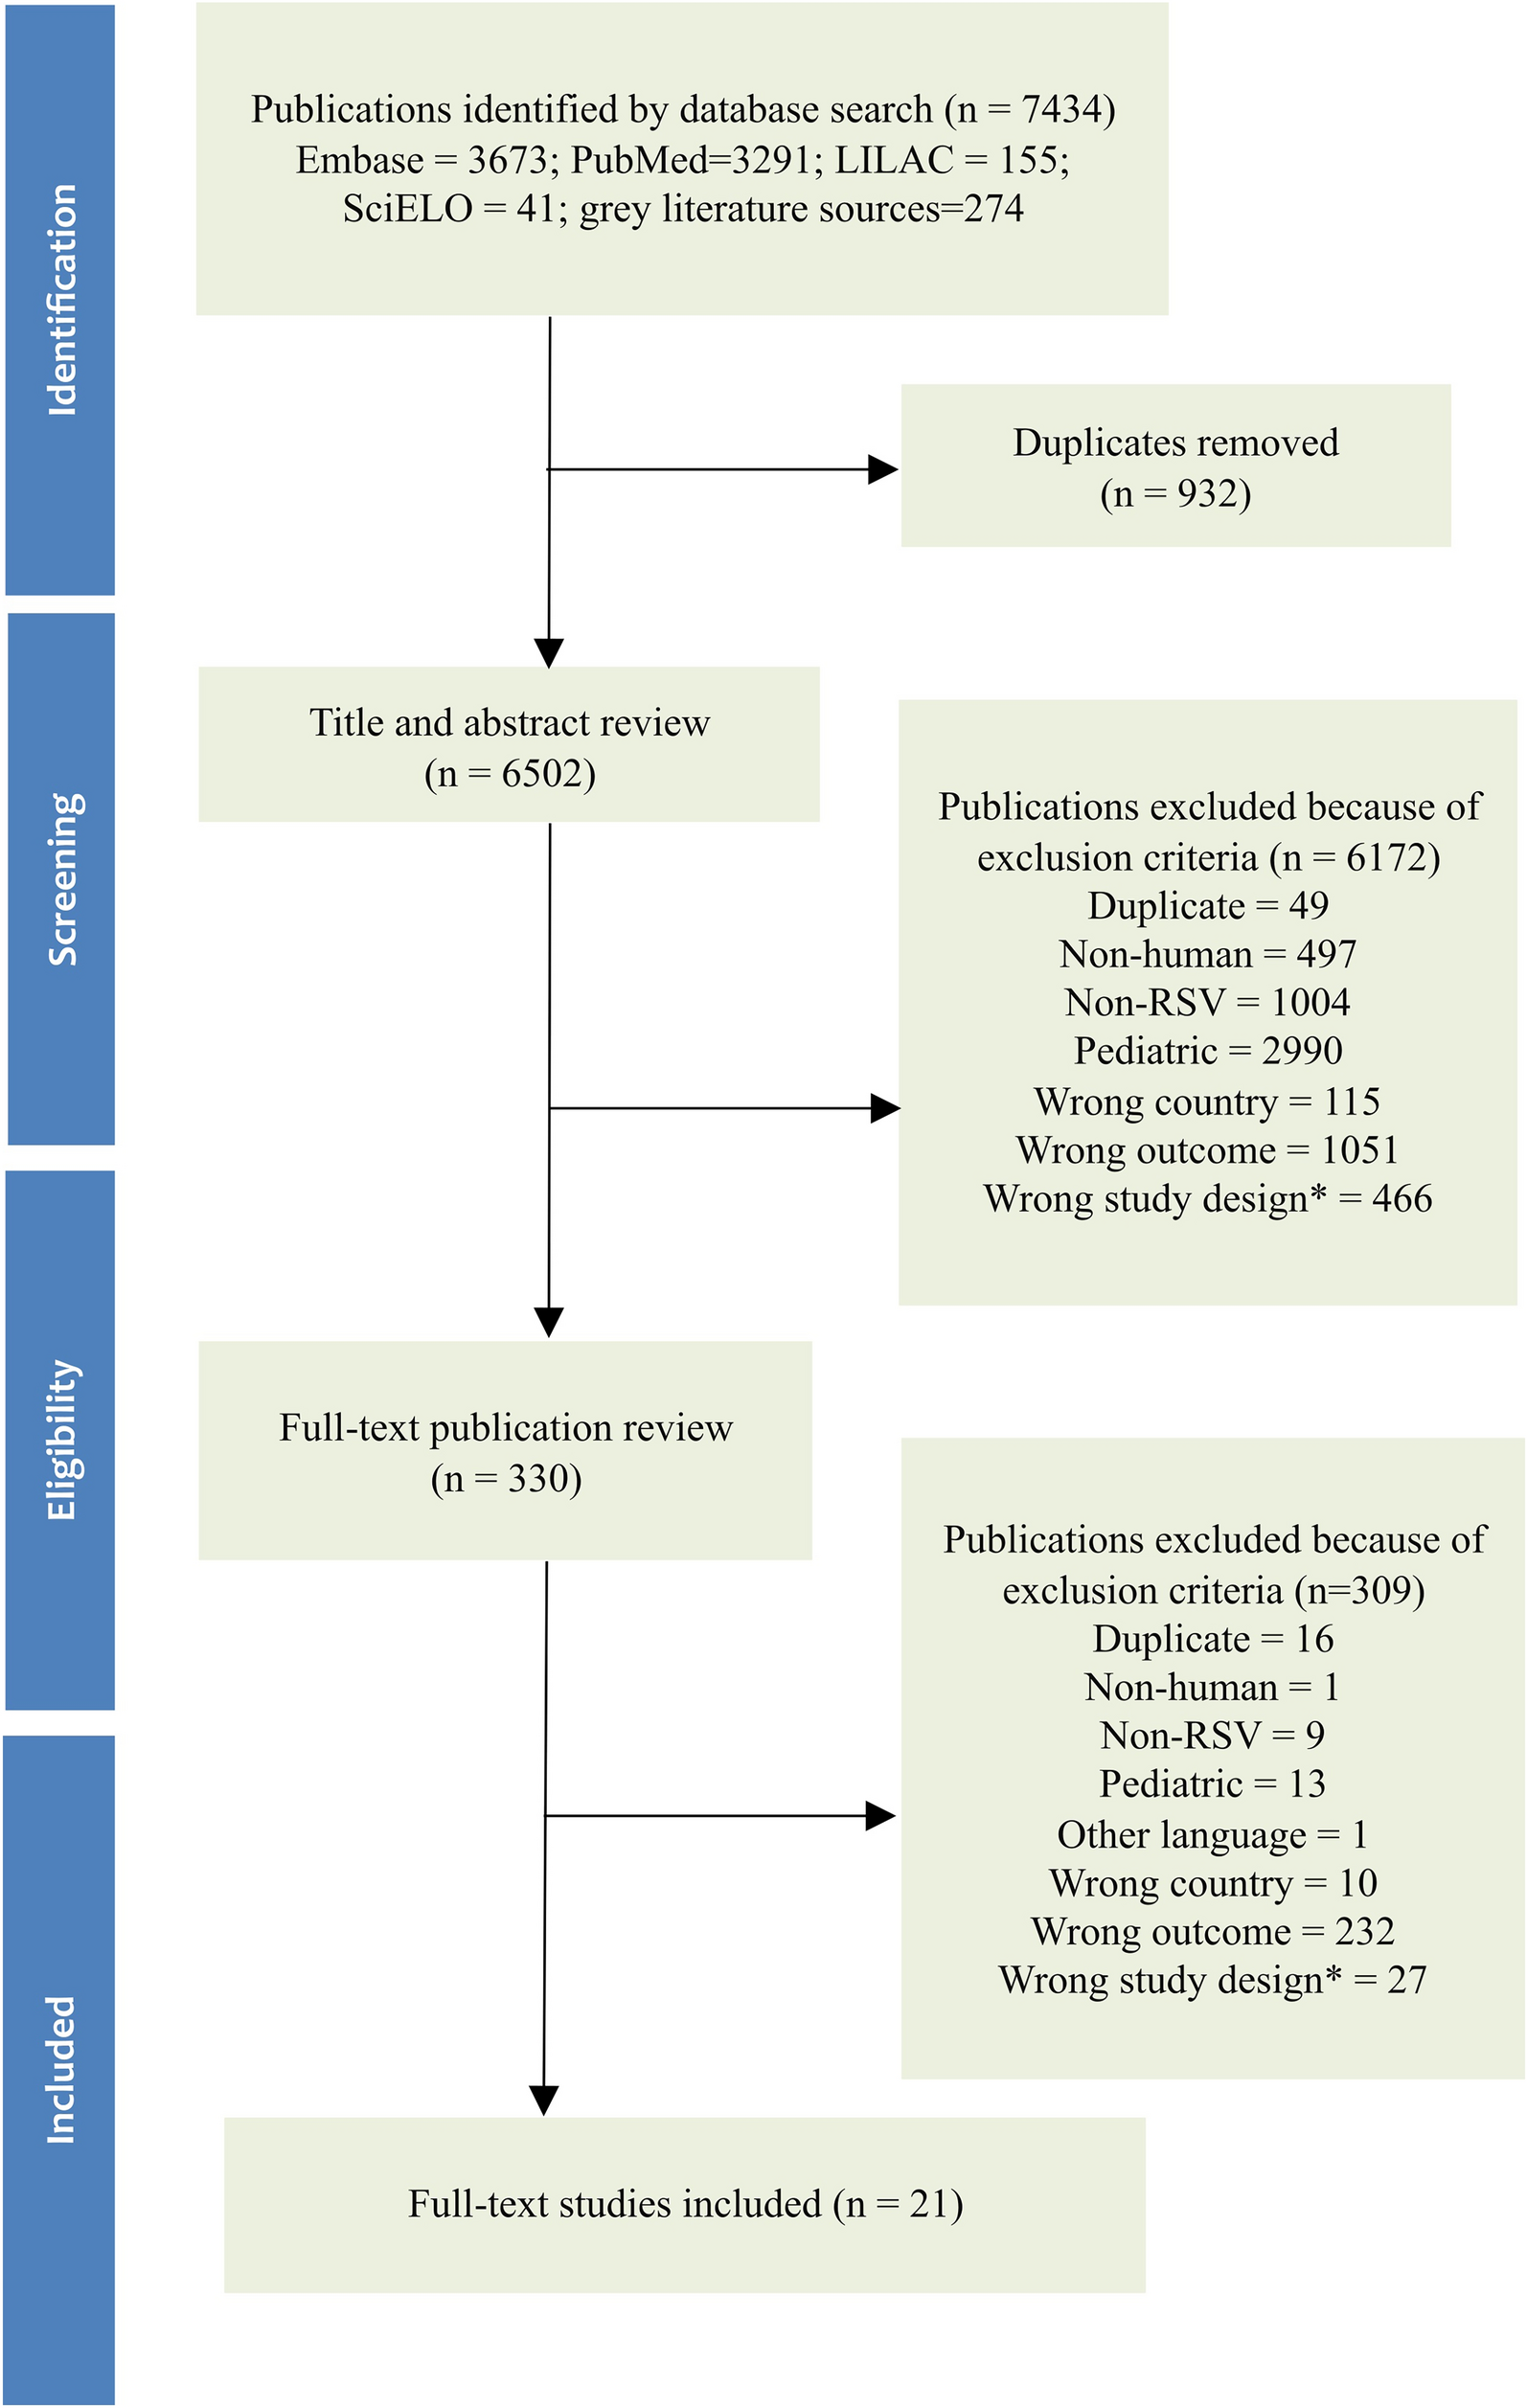 Respiratory Syncytial Virus Sequelae Among Adults in High-Income Countries: A Systematic Literature Review and Meta-analysis